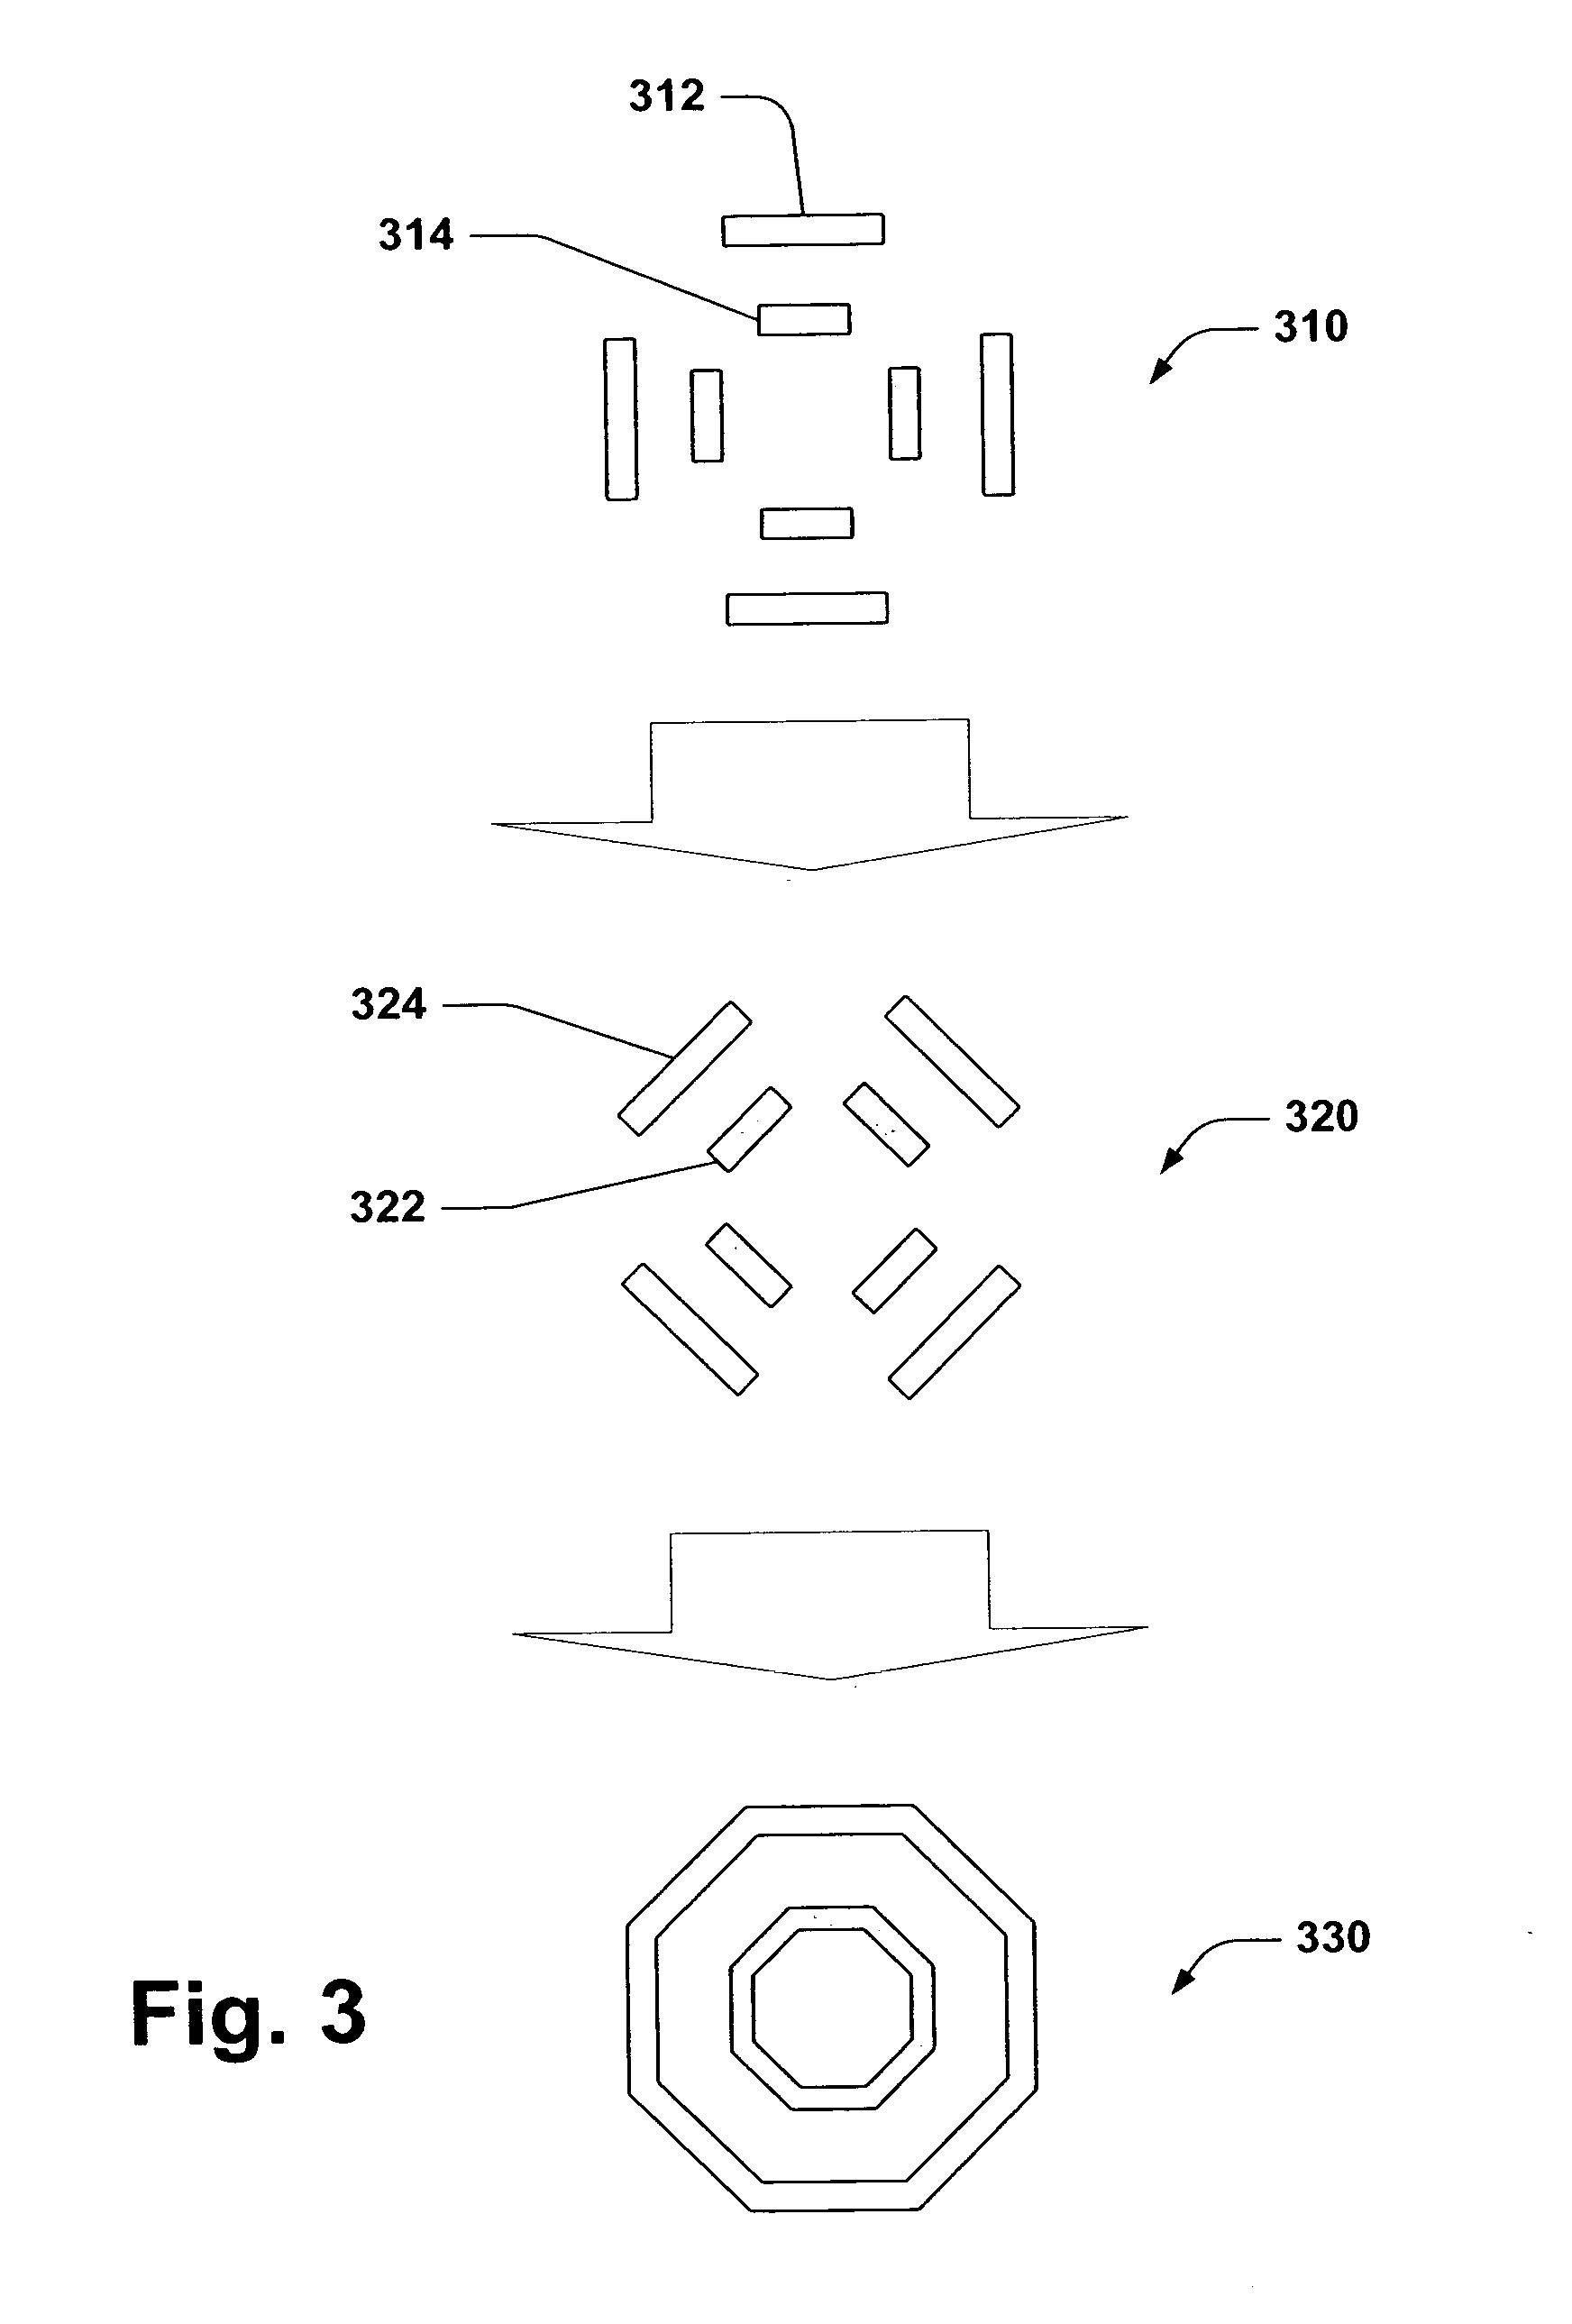 Pattern recognition and metrology structure for an x-initiative layout design